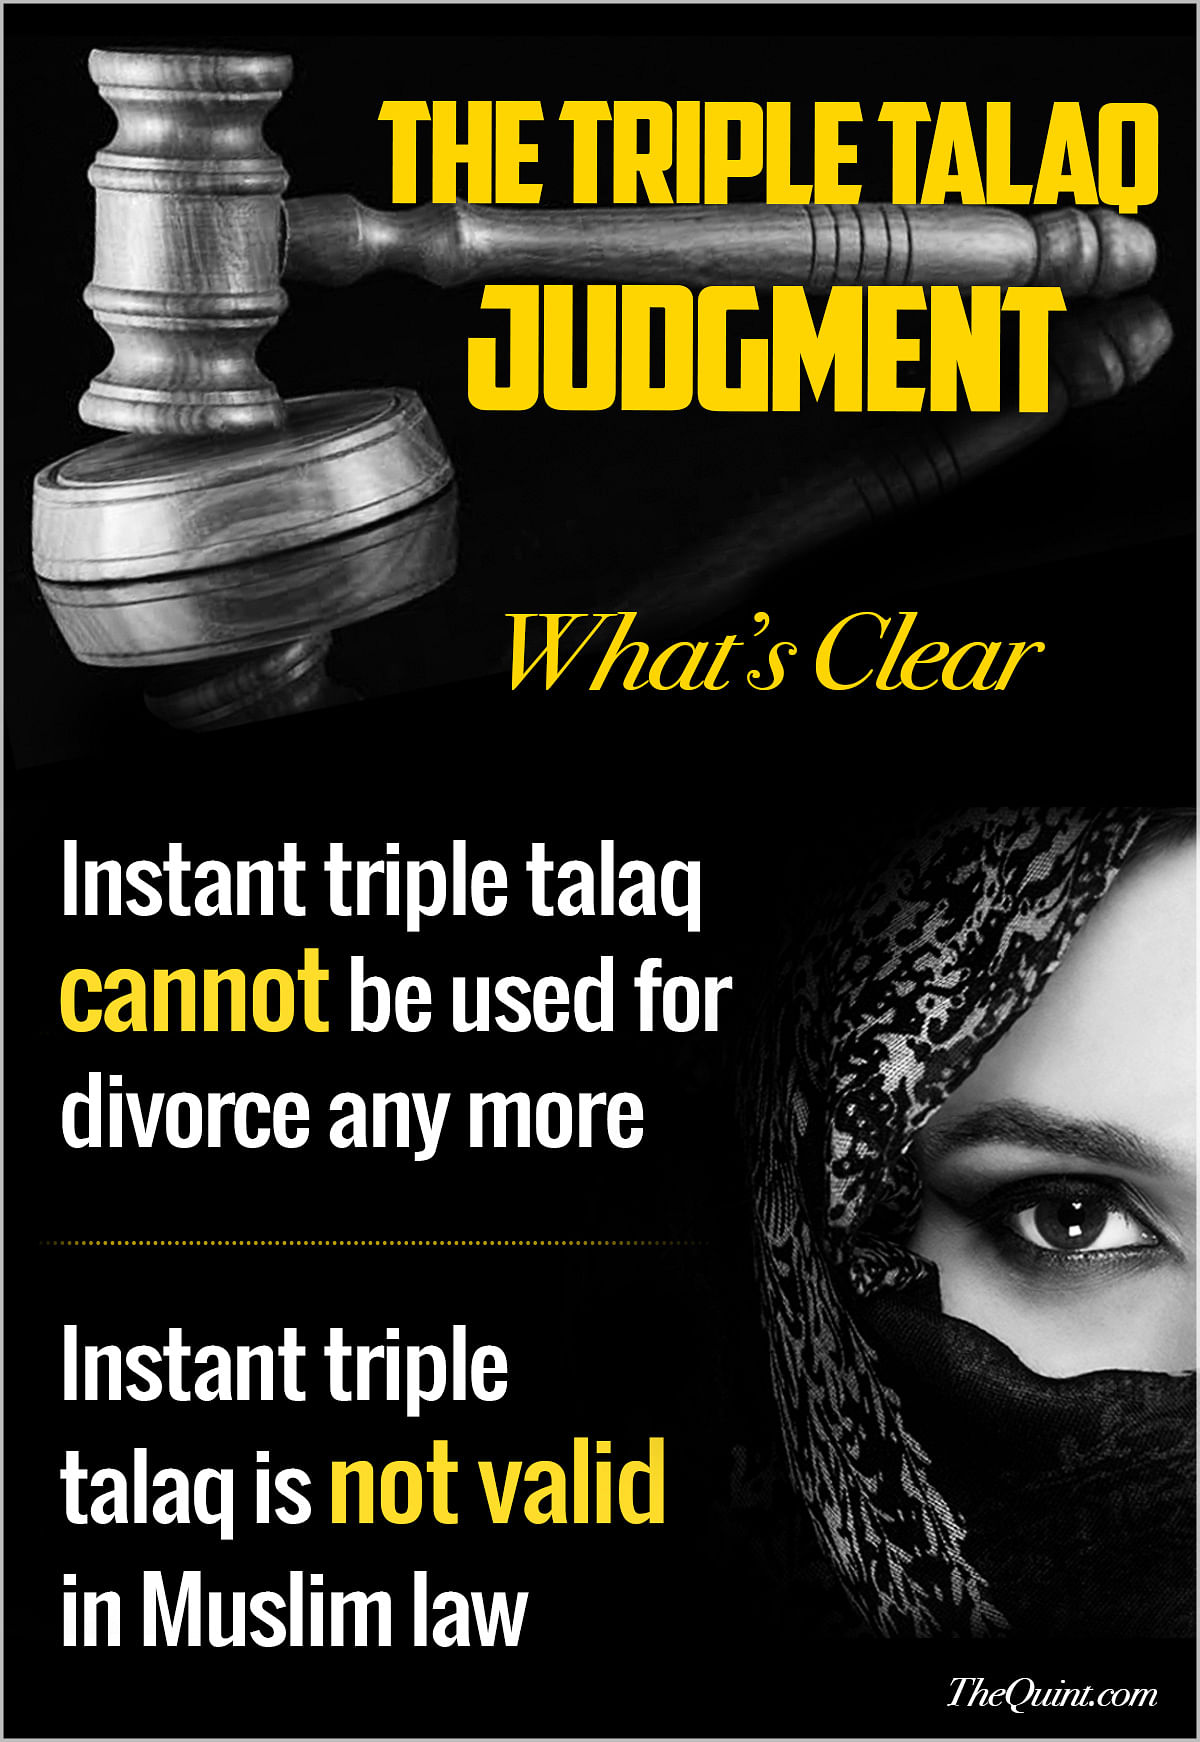 

The validity of triple talaq was struck down with a majority of the 3:2 split within the five-judge bench.